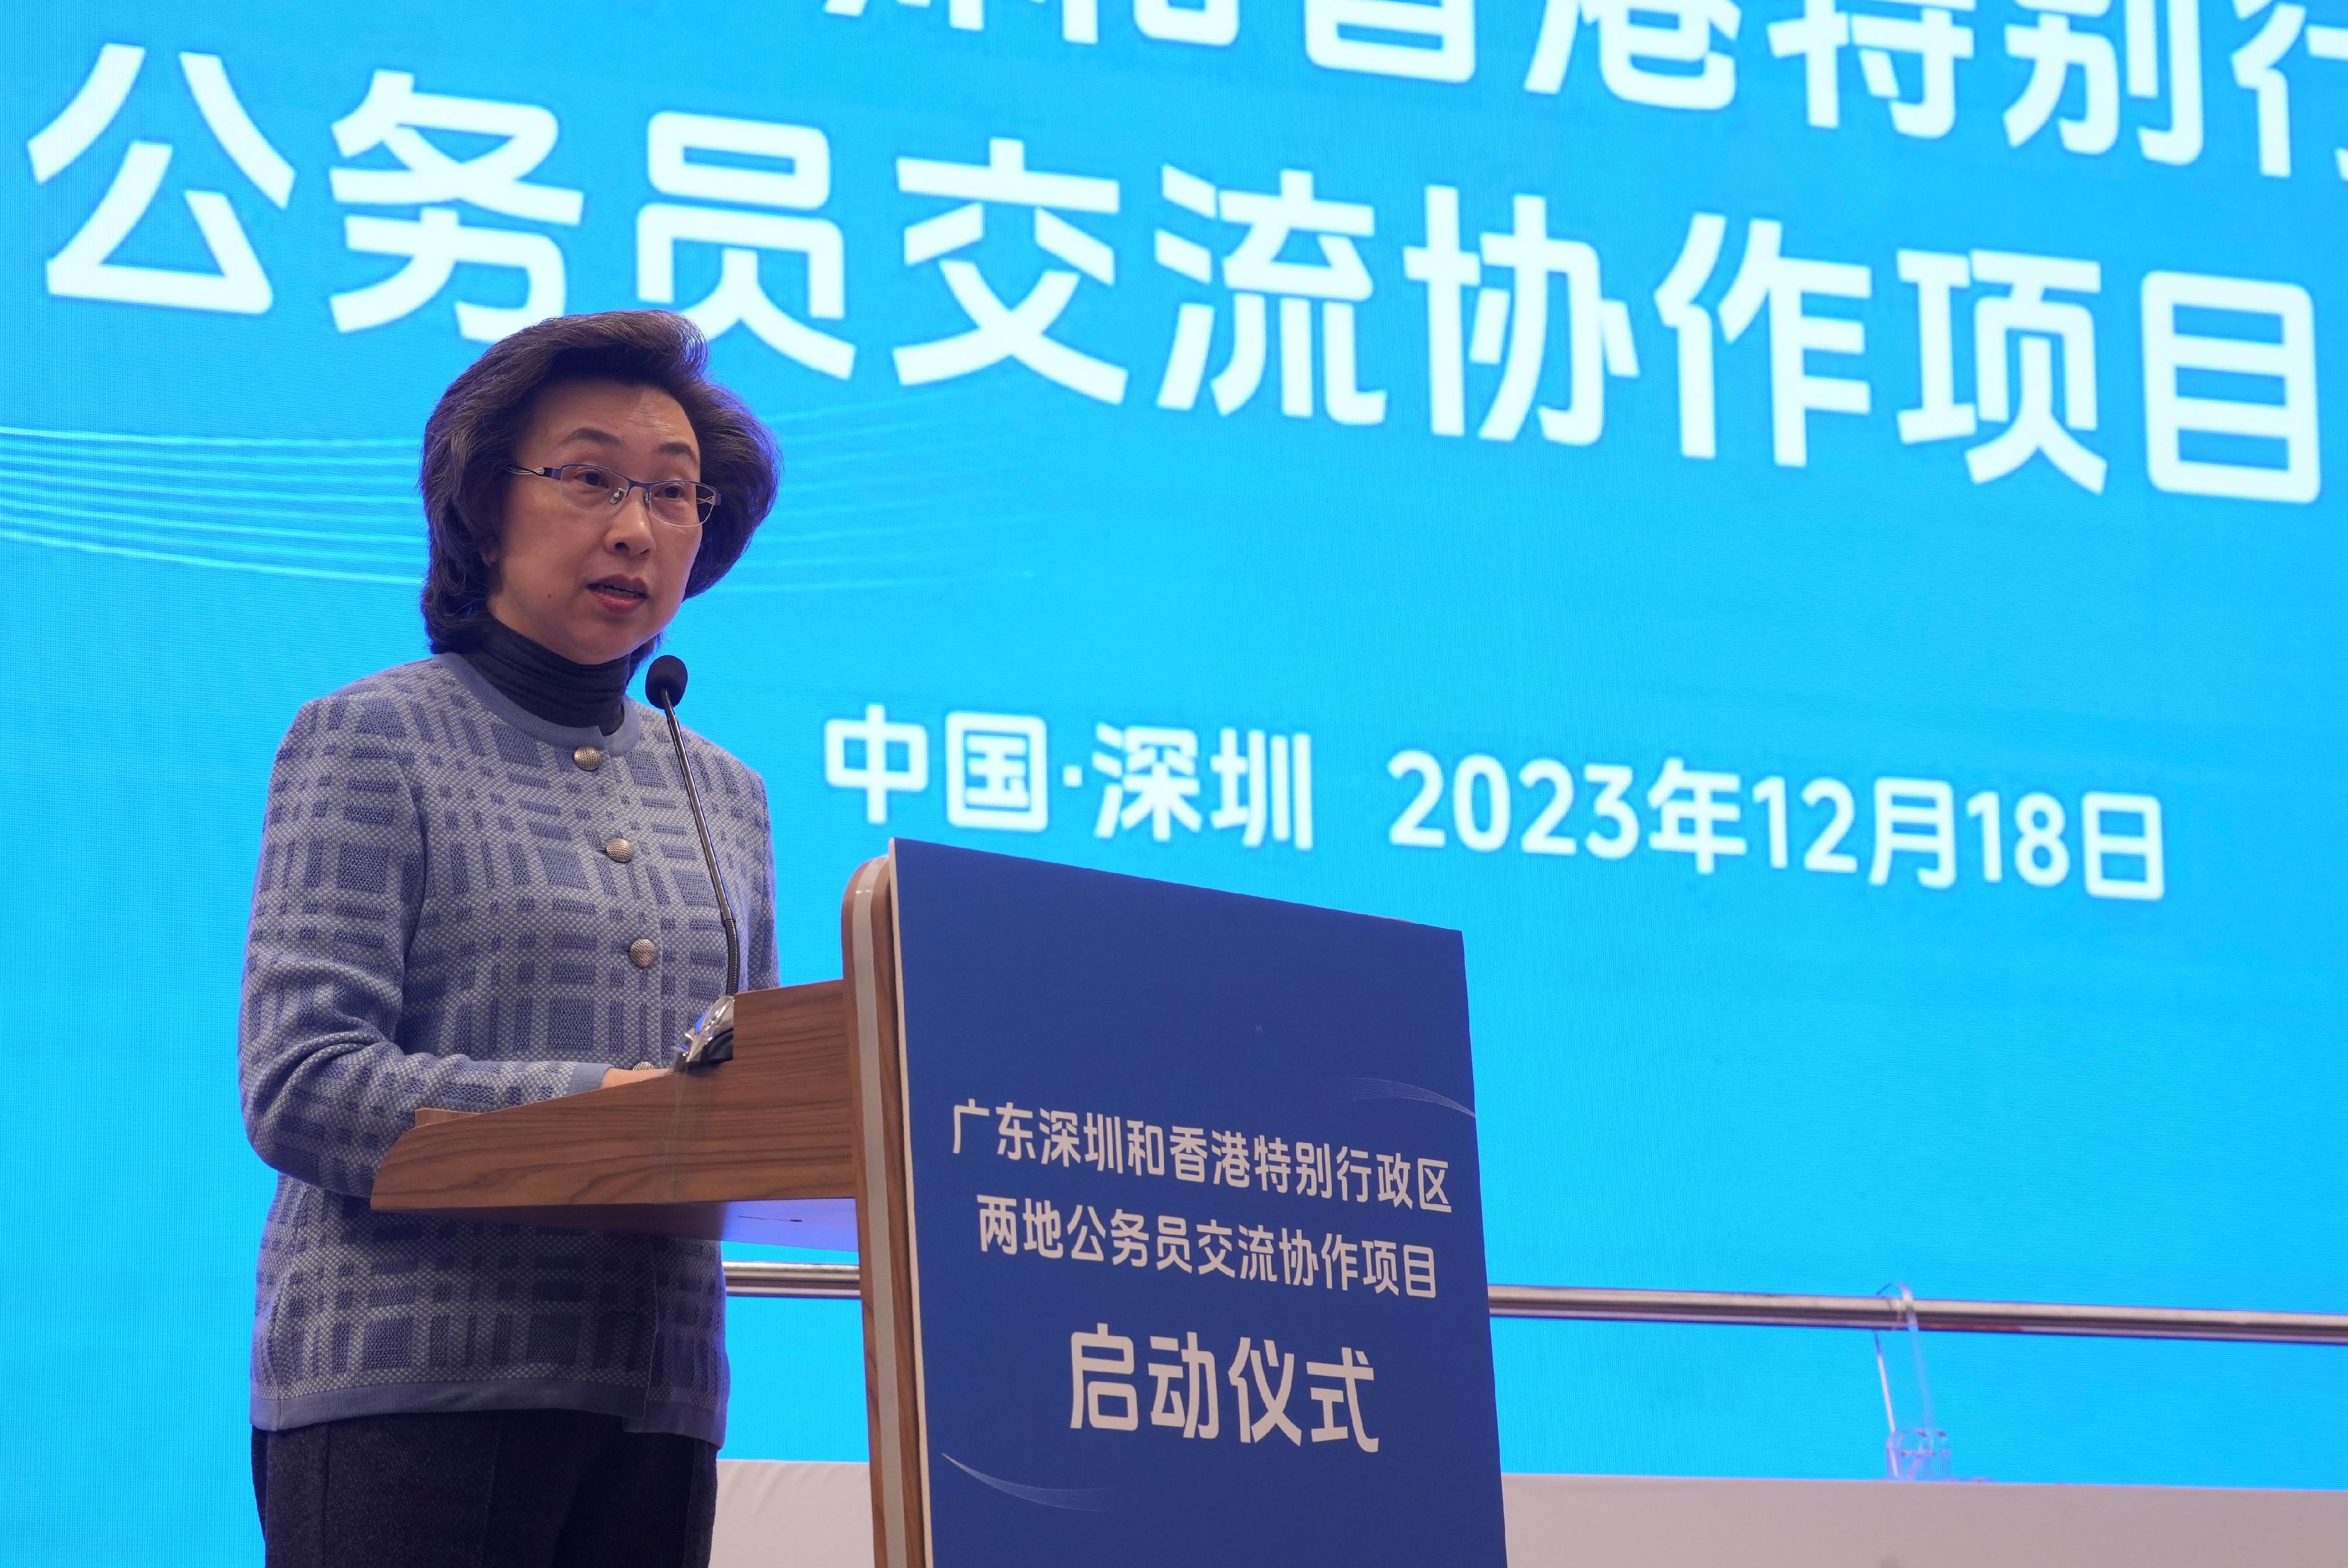 The Civil Service Staff Exchange and Collaboration Programme, jointly organised by the Hong Kong Special Administrative Region Government and the Mainland municipalities in the Guangdong-Hong Kong-Macao Greater Bay Area, was launched in Shenzhen today (December 18). Photo shows the Secretary for the Civil Service, Mrs Ingrid Yeung, addressing the ceremony.